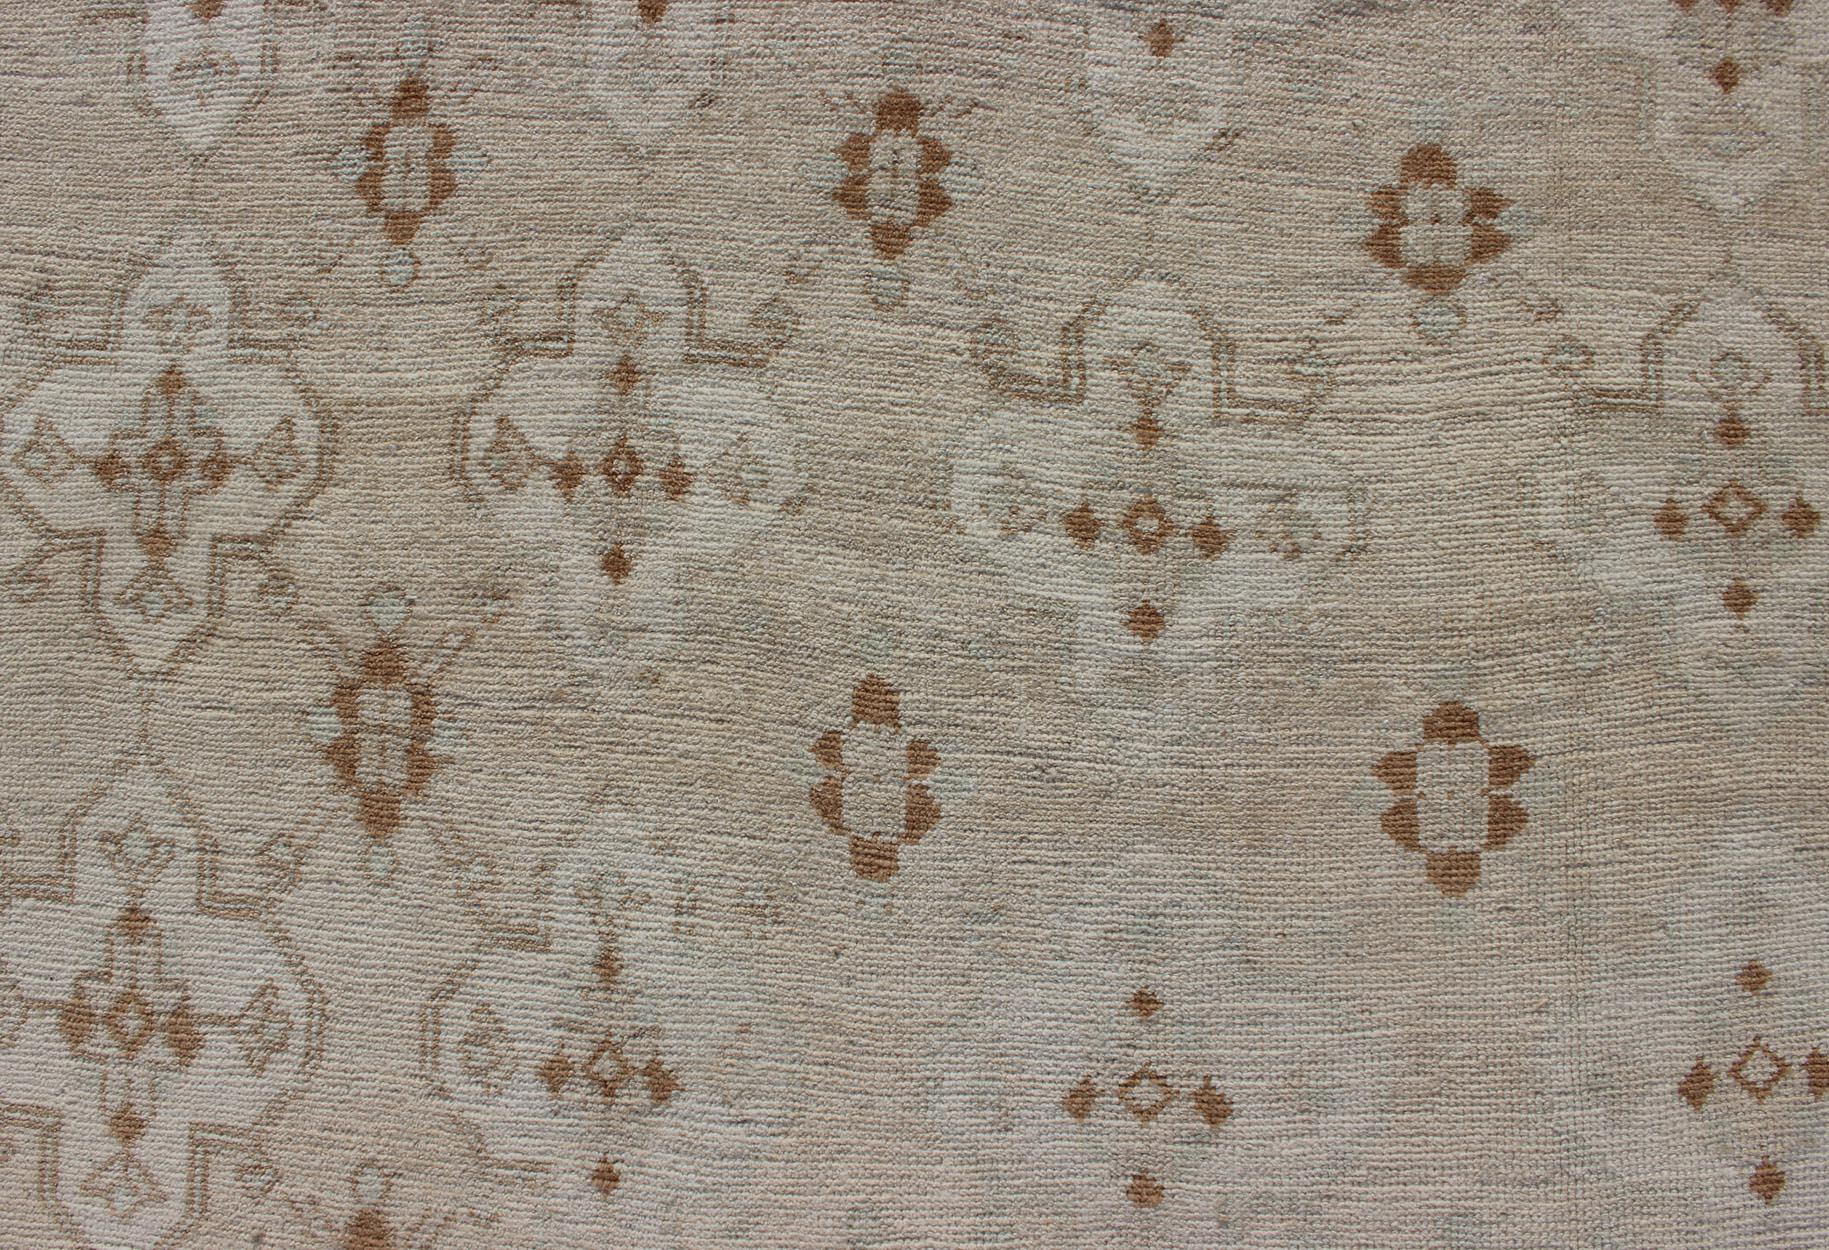 Muted Oushak with All-Over Tribal Design in Light Tones of Taupe and Browns In Good Condition For Sale In Atlanta, GA